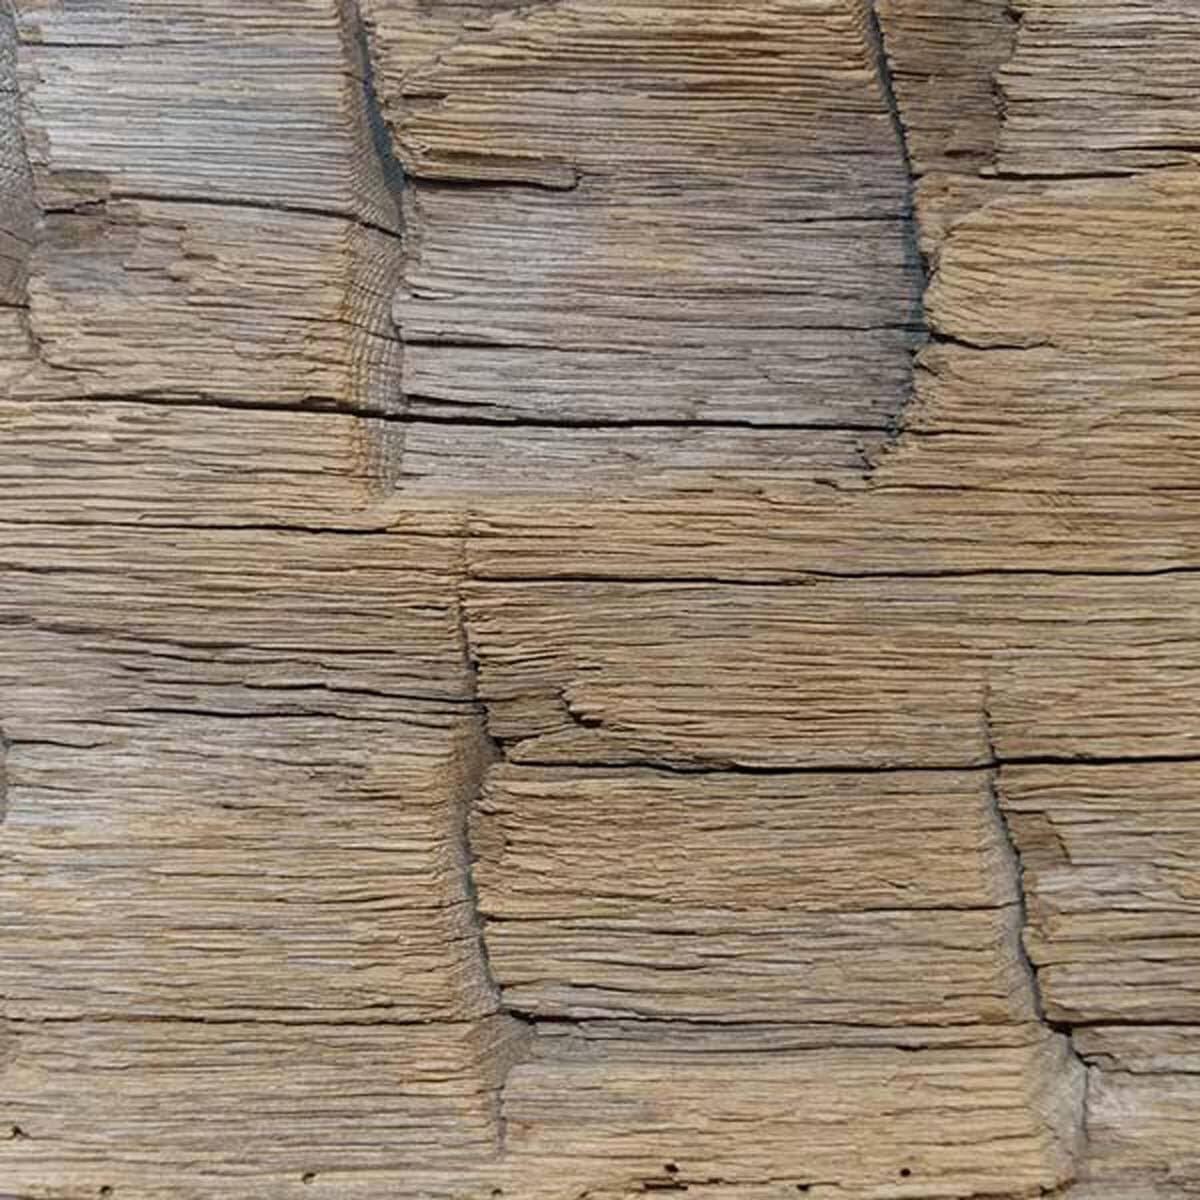 Hand hewn surface texture for reclaimed wood